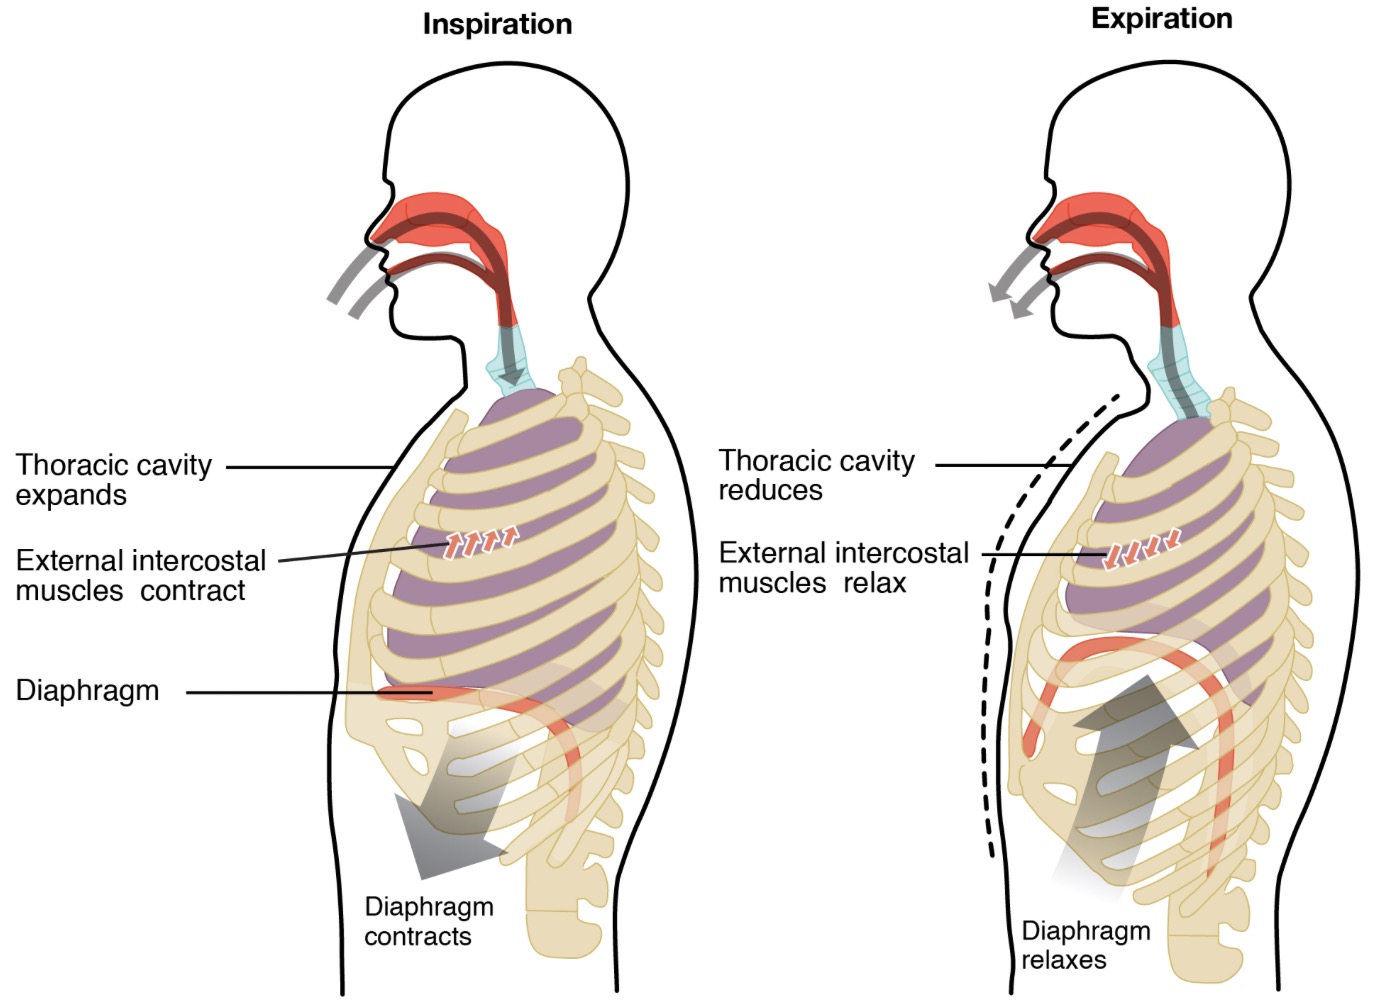 As the thoracic muscles relax, what happens to the volume of the